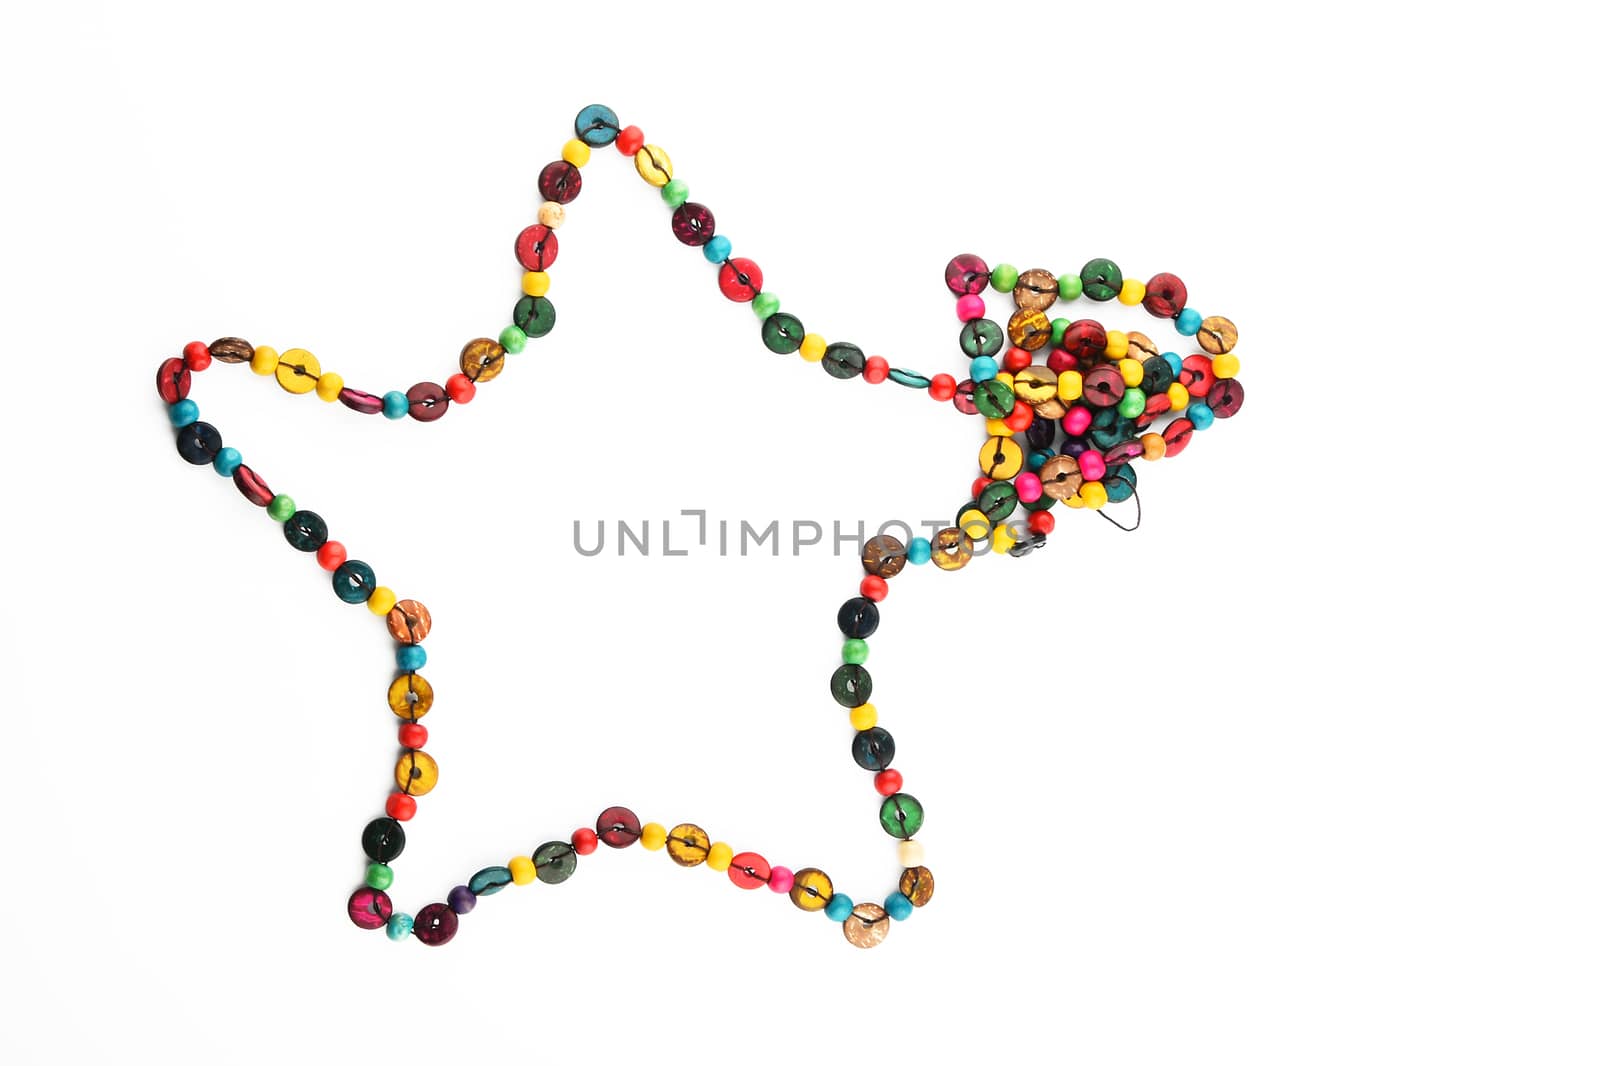 Star shaped colorful wooden beads necklace isolated on white by BreakingTheWalls